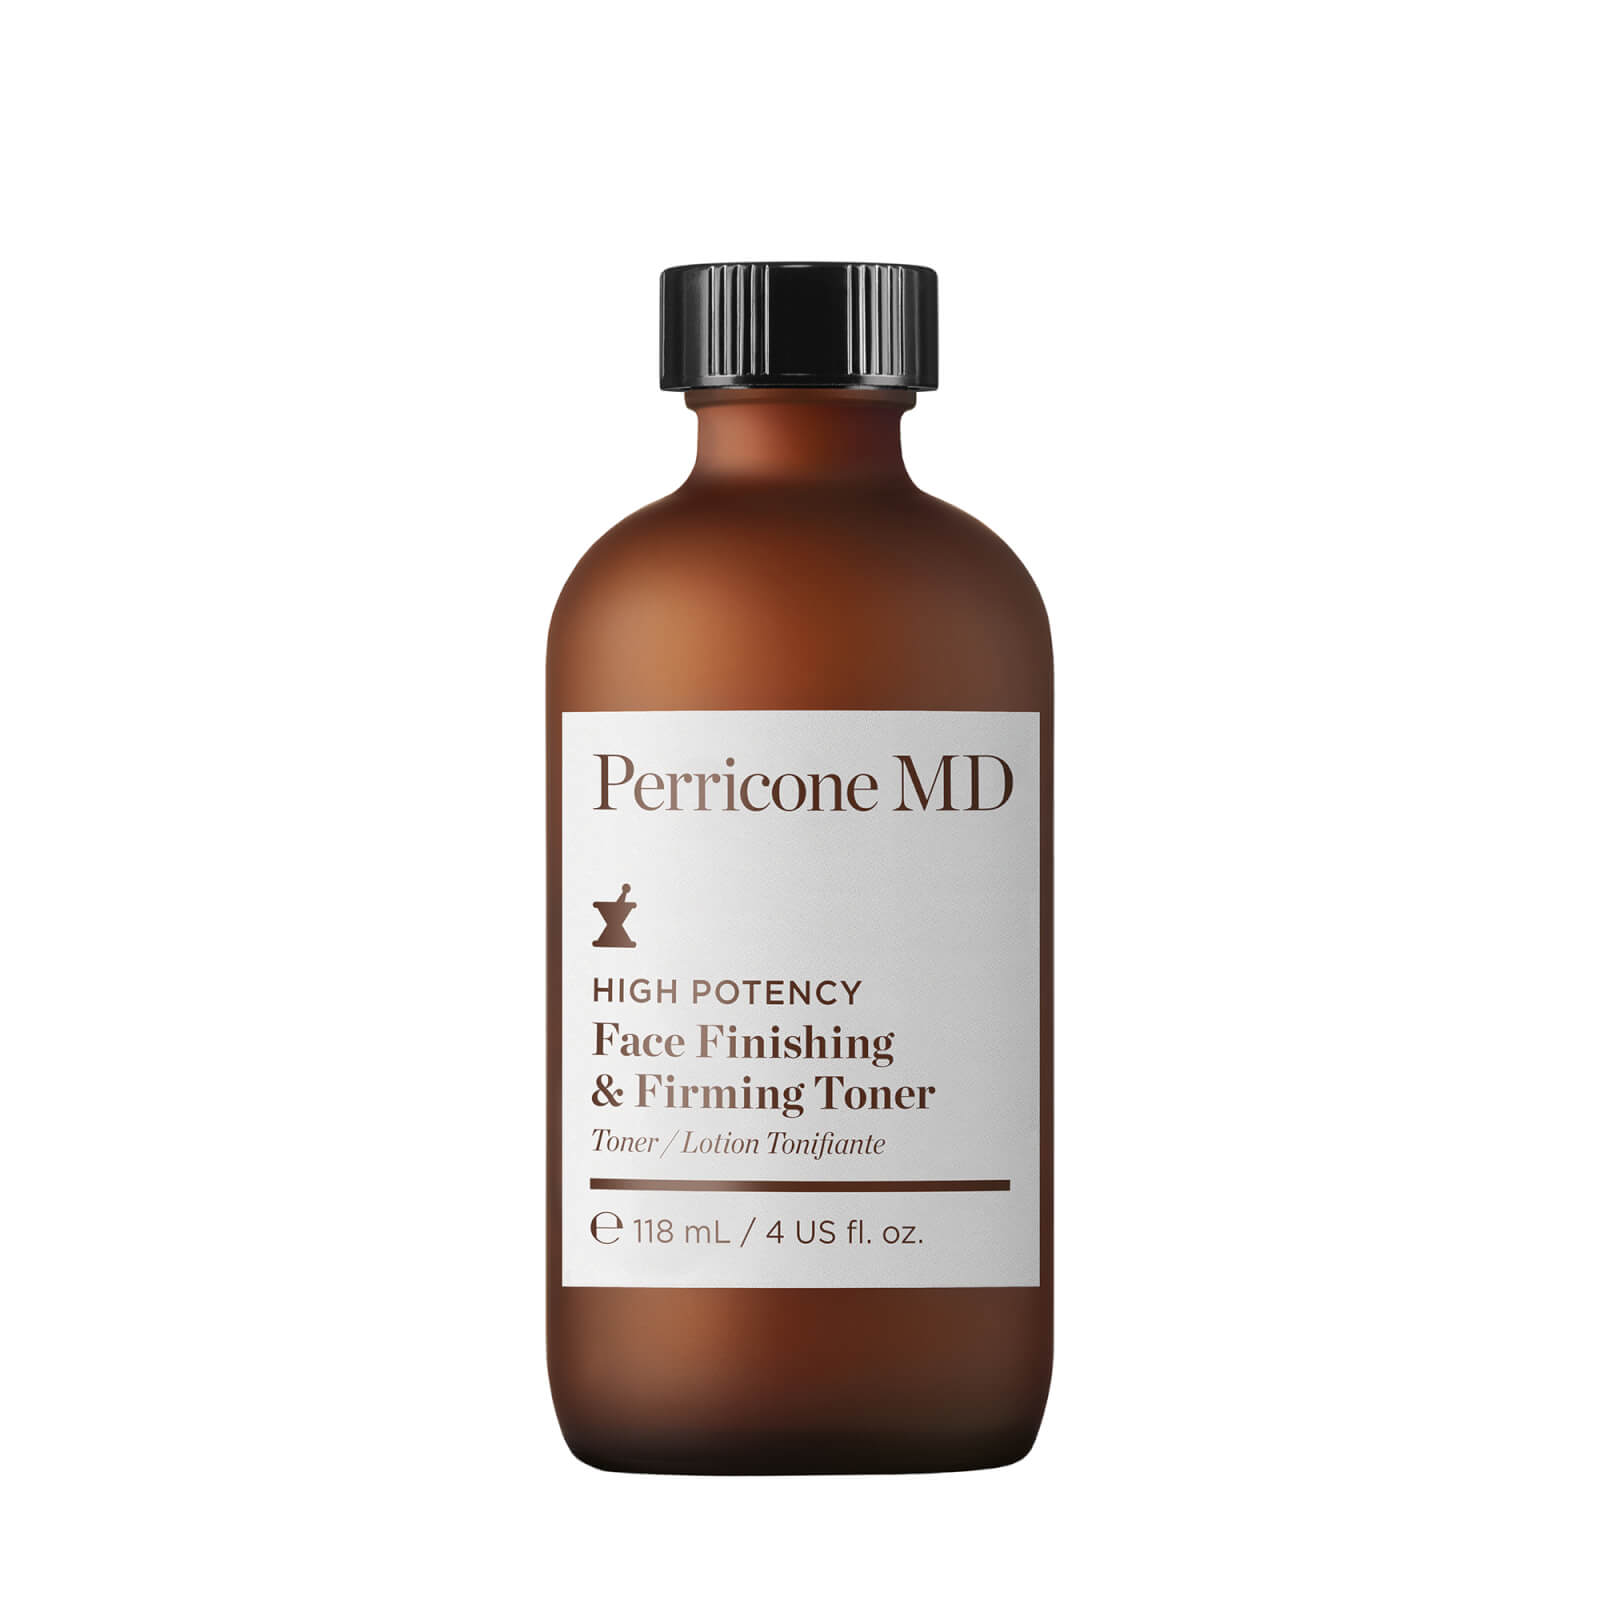 Perricone Md High Potency Face Finishing & Firming Toner